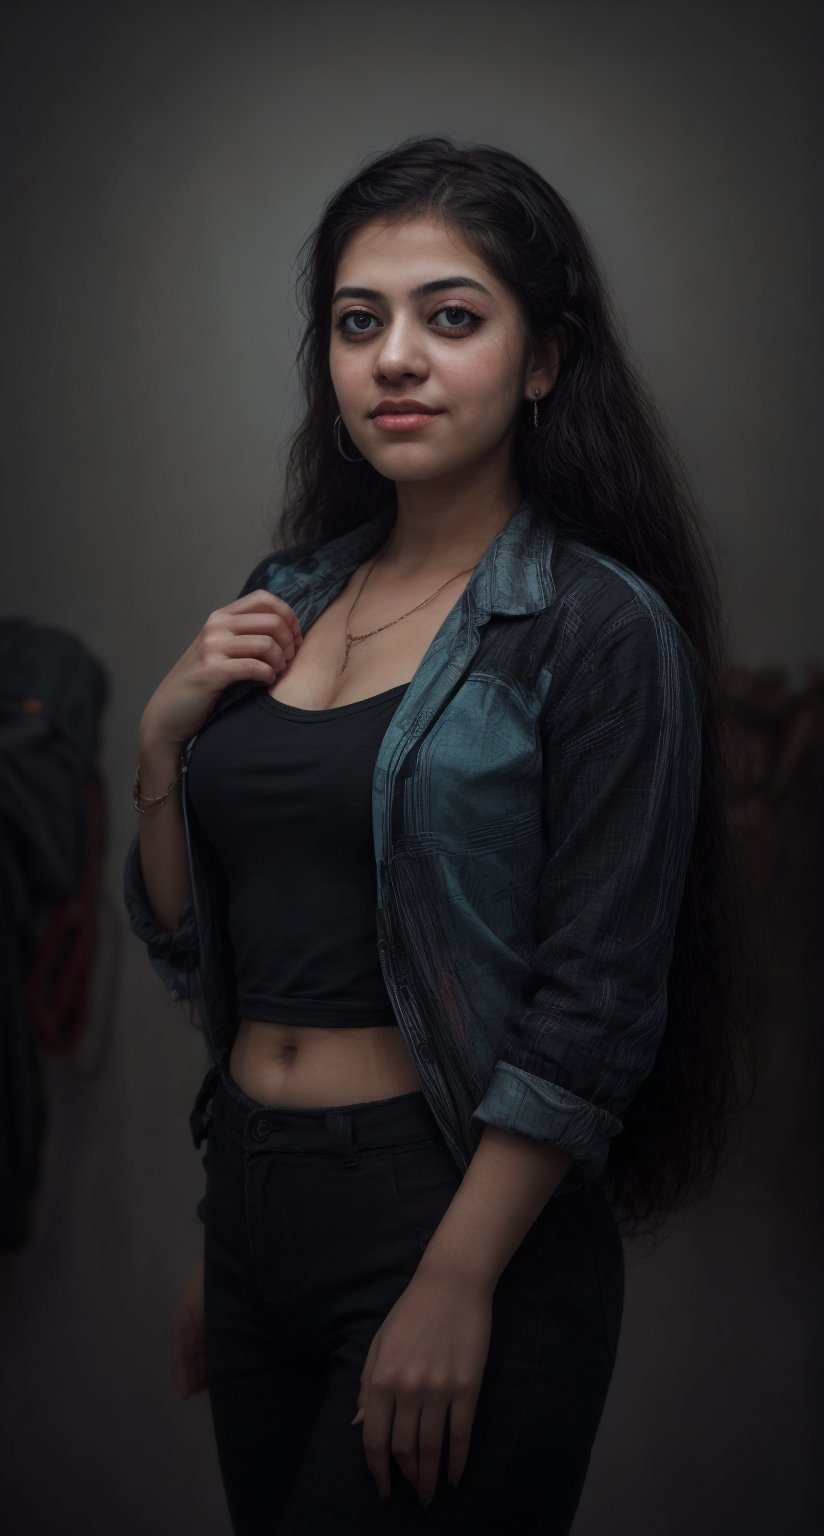 Cyberpunk, Neon glow, masterpiece, high resolution, best quality, 4k, 1girl, solo, beauty photo, amateur photo, 1girl, eye level, oversized button-up shirt, and hoop earrings, Teal-colored Flat ironed straight, stand pose in locker room,lighting,photorealistic,Curly girl ,redneonstyle,Rebecca ,Mallu girl 